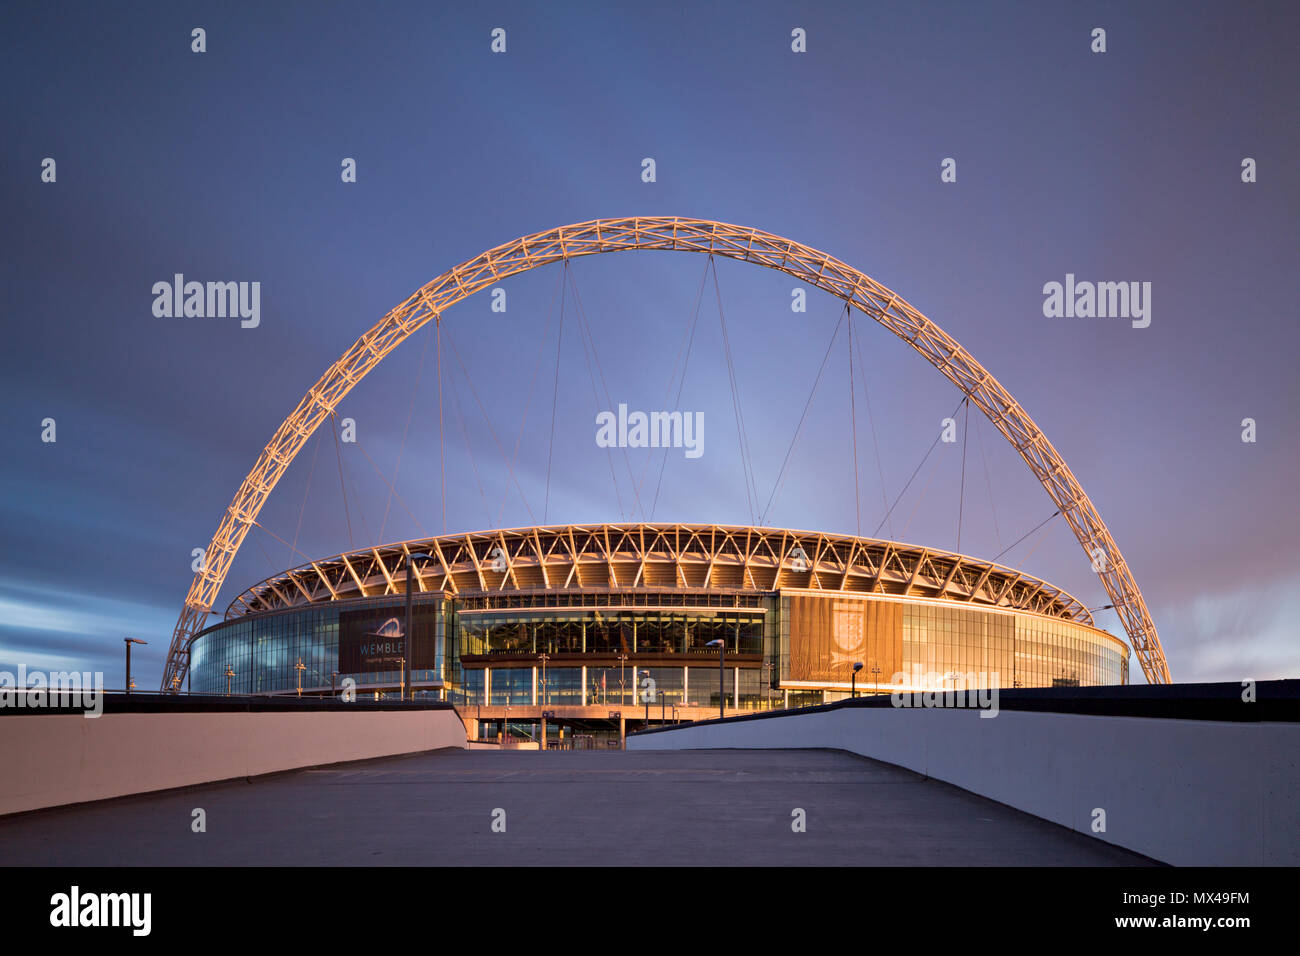 Wembley stadium in the warm glow of the setting sun. Stock Photo